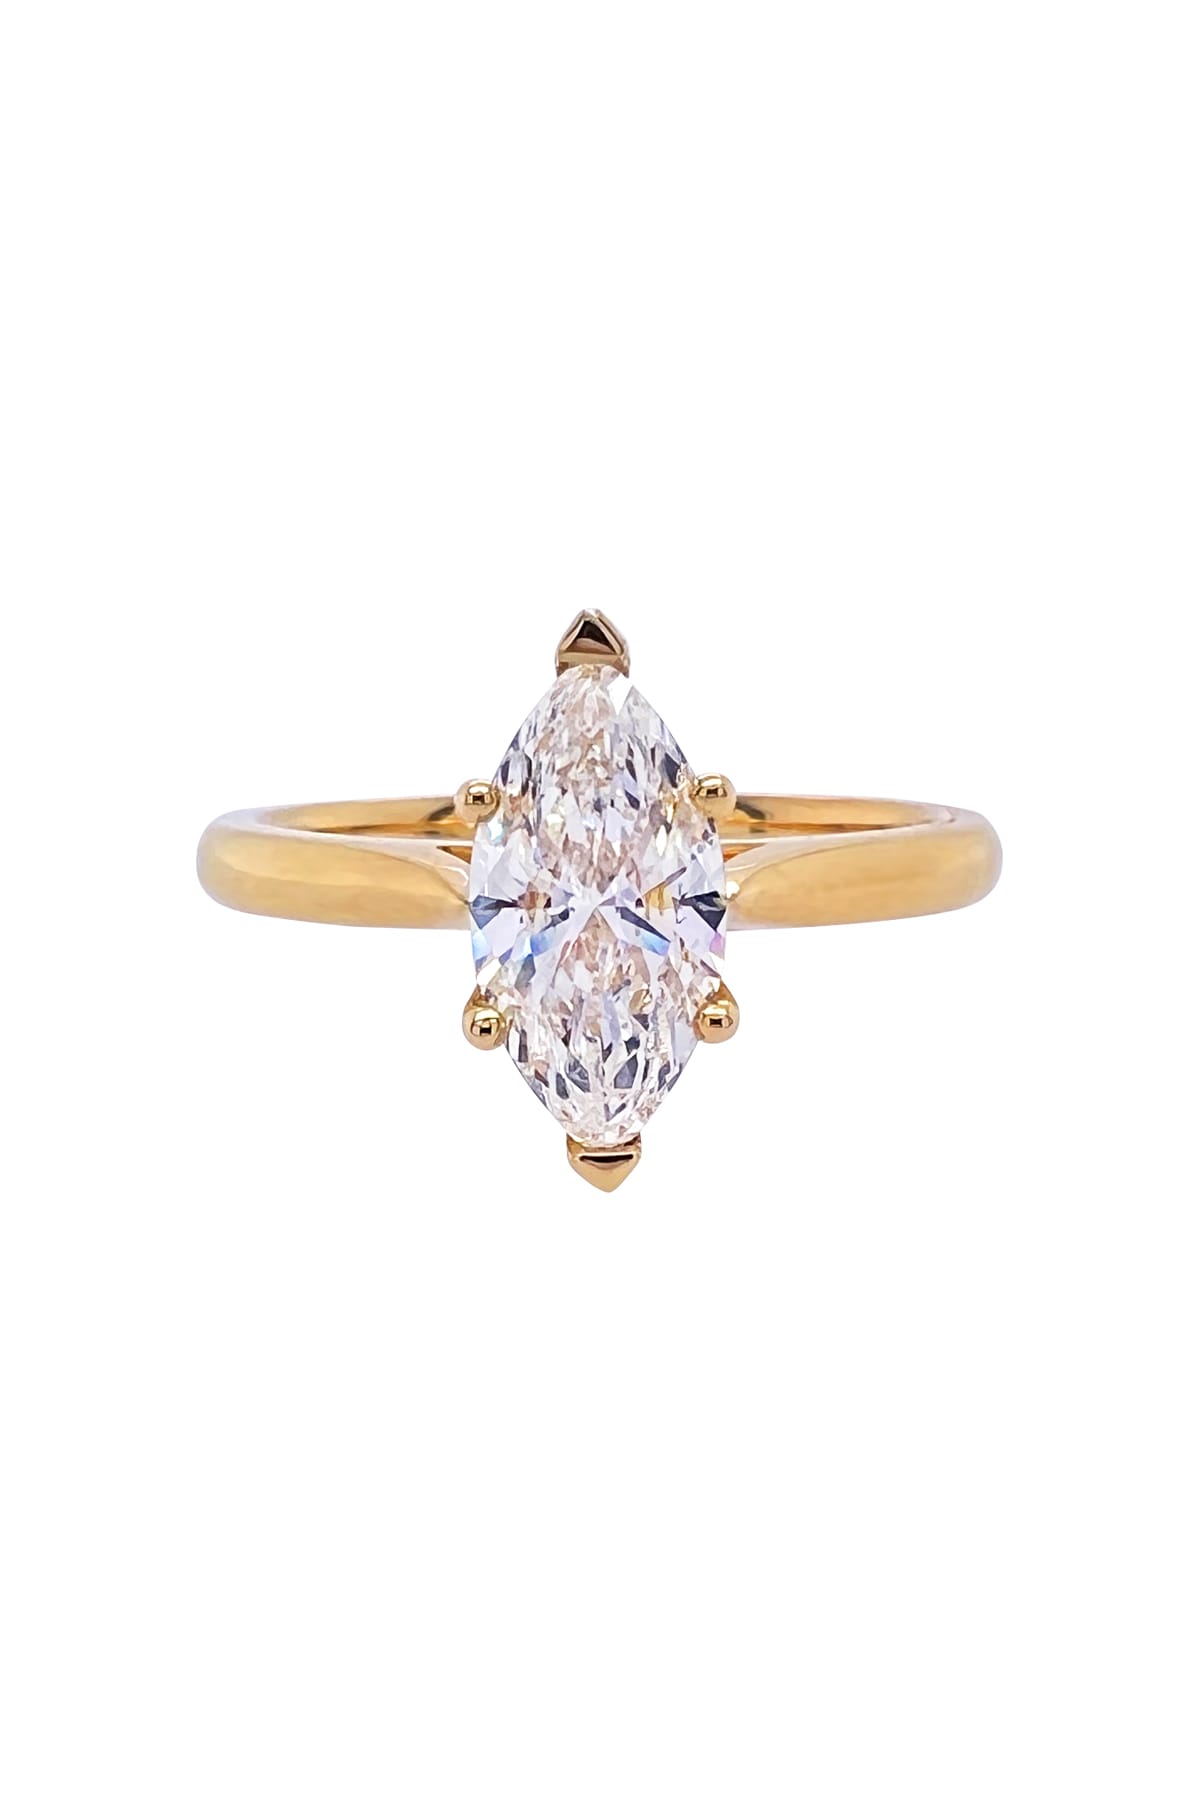 Marquise Solitaire 1.02 Carat Diamond Engagement Ring available at LeGassick Diamonds and Jewellery Gold Coast, Australia.